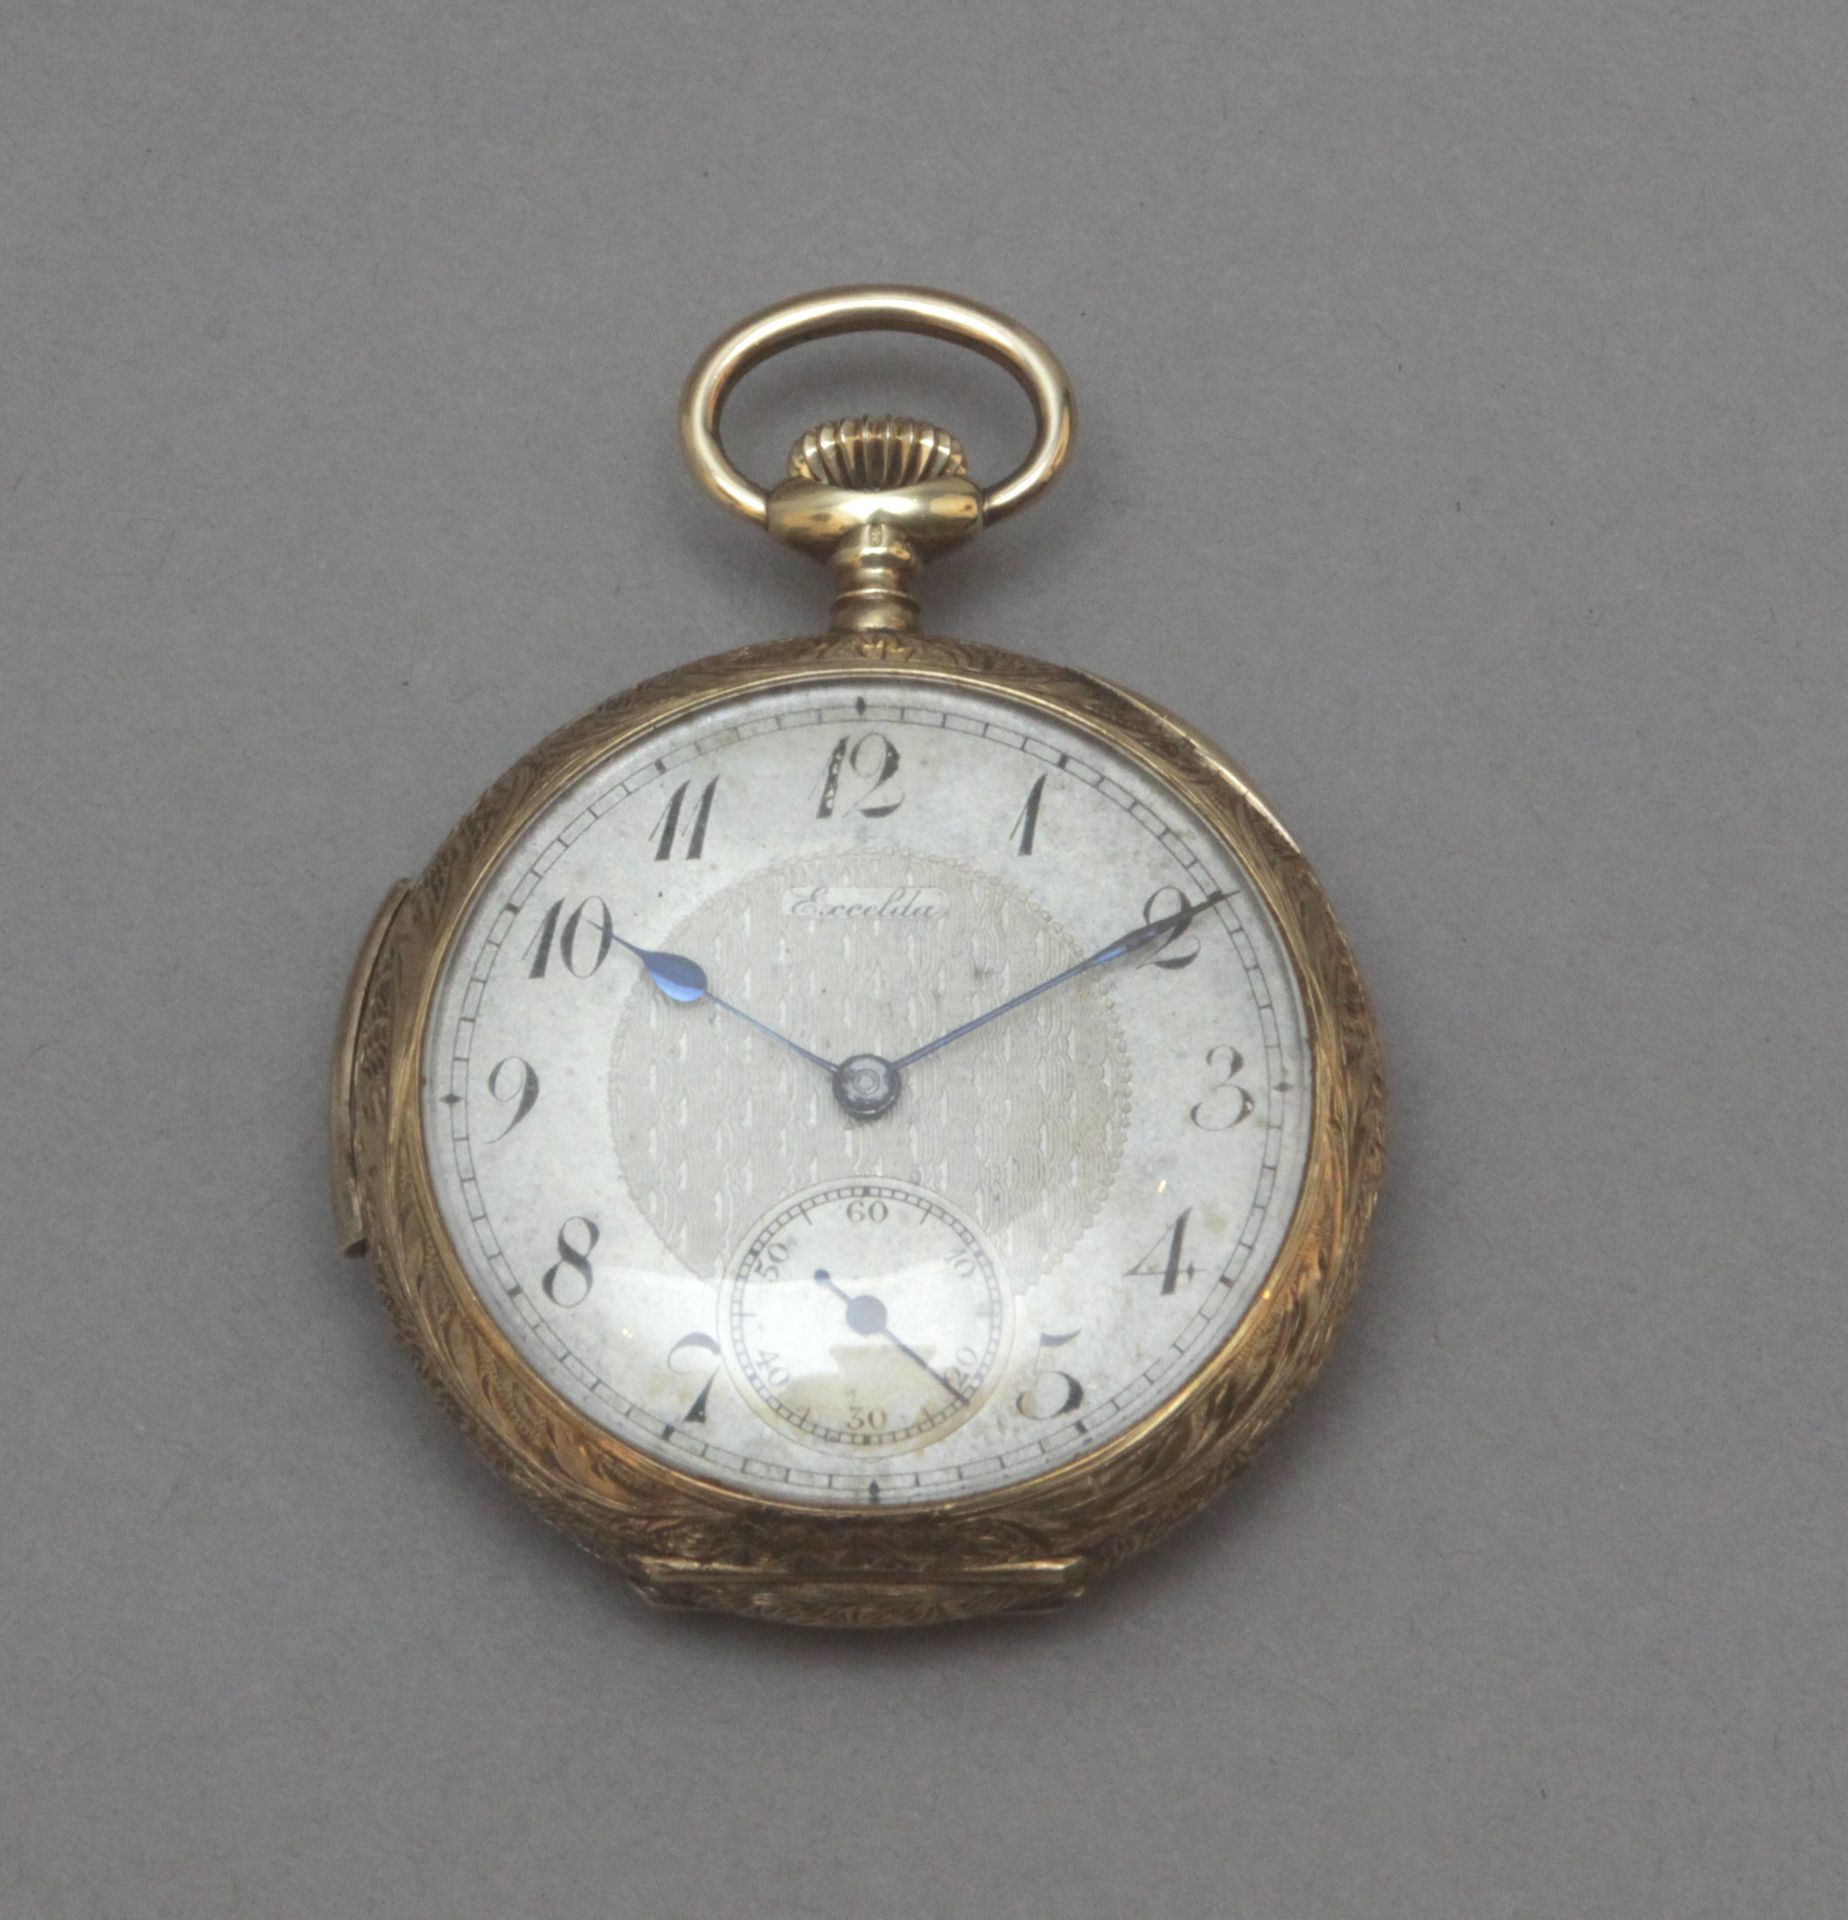 Excelda. An early 20th century 18k yellow gold open face pocket watch